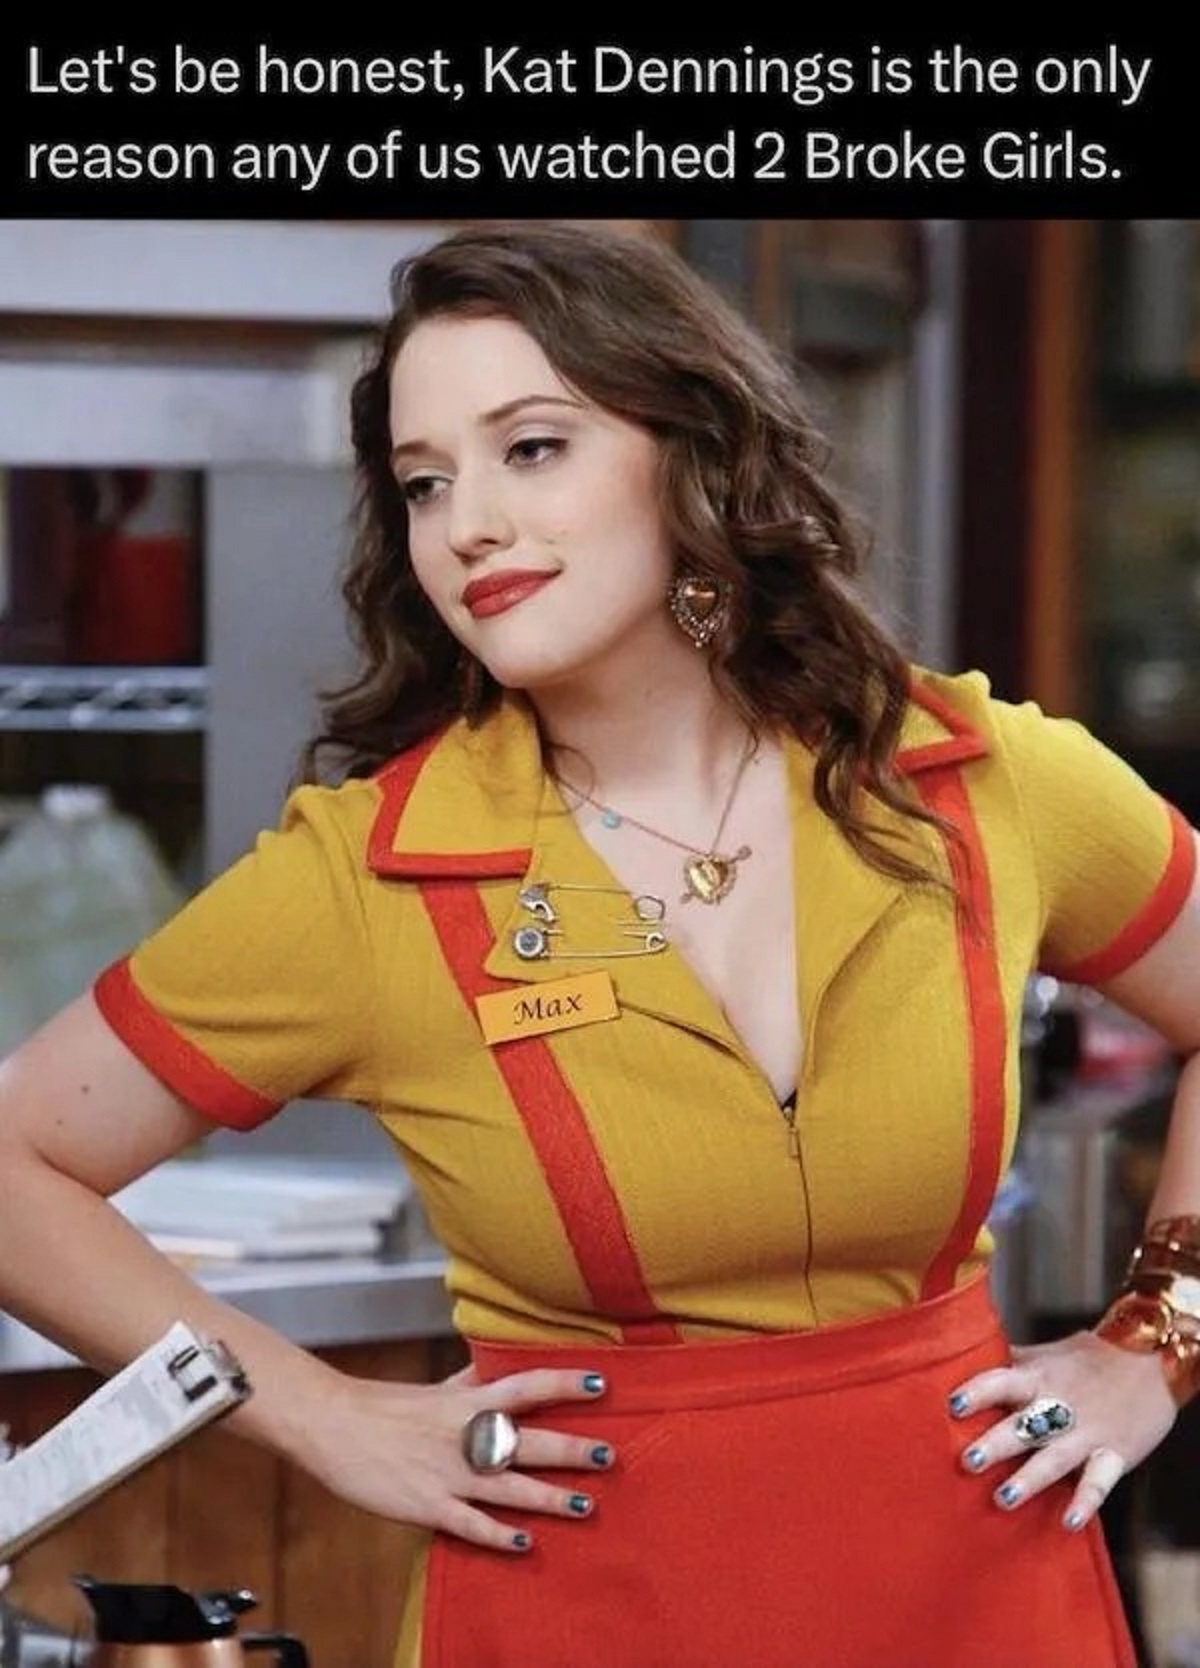 kat dennings max - Let's be honest, Kat Dennings is the only reason any of us watched 2 Broke Girls. 93 Max